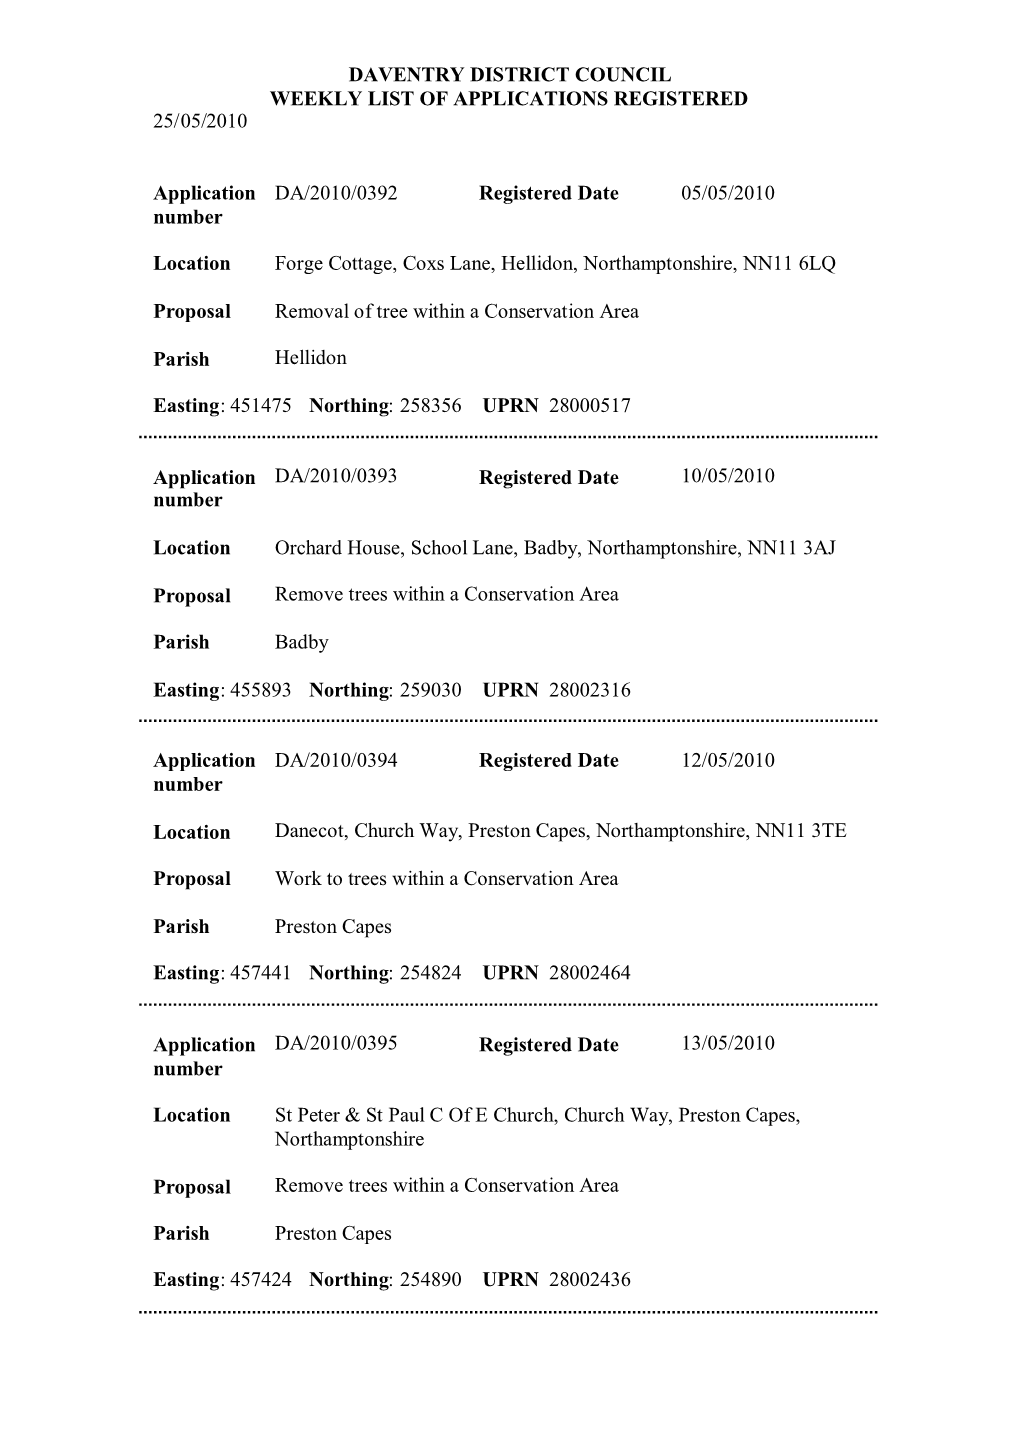 Daventry District Council Weekly List of Applications Registered 25/05/2010